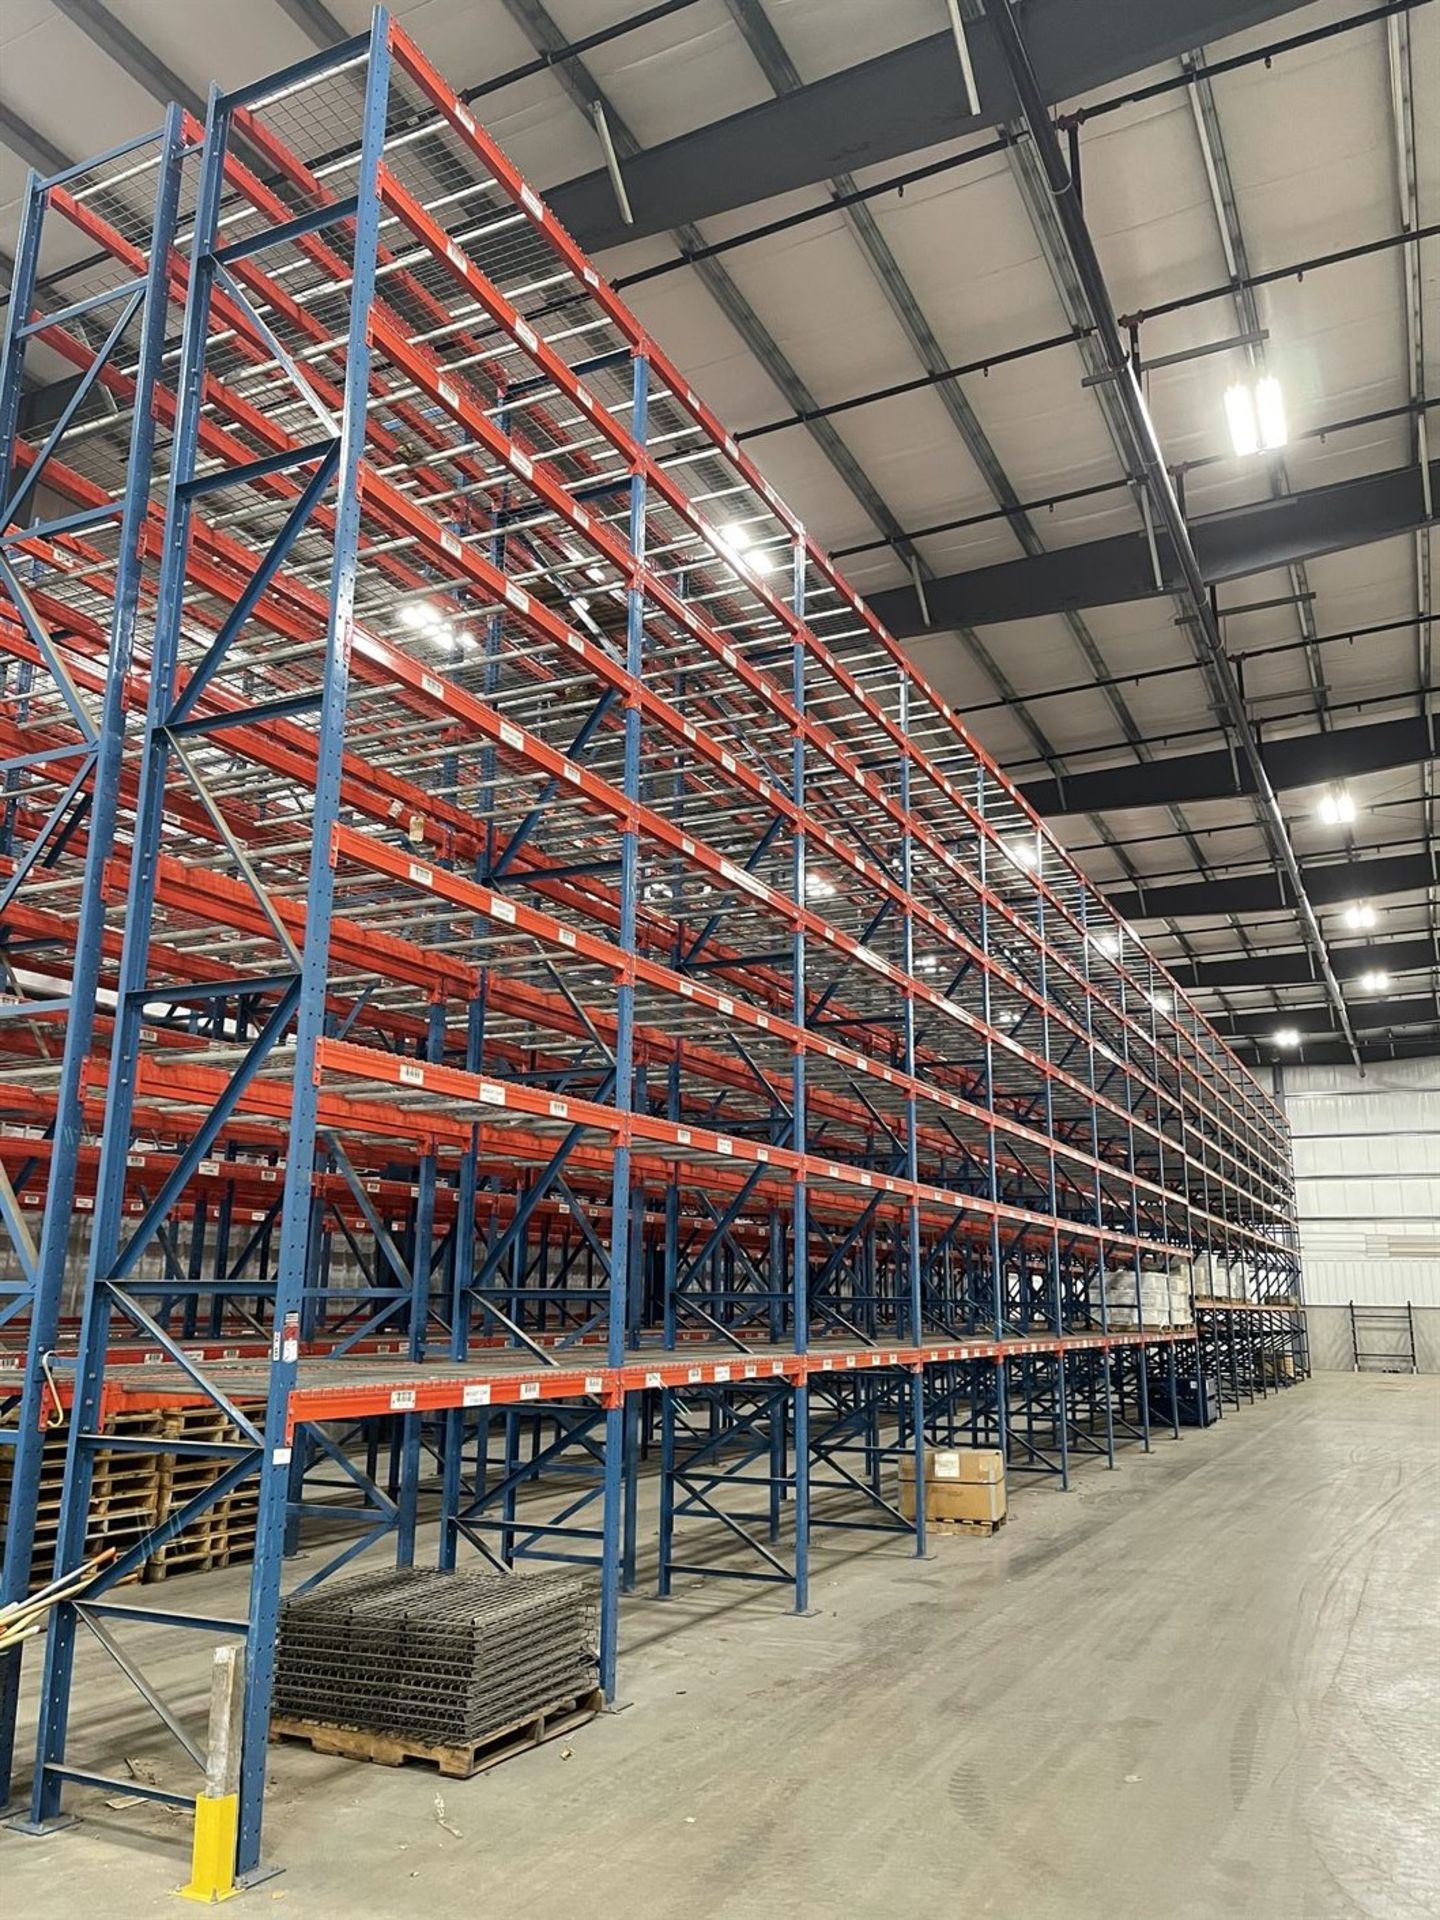 Row of (18) Sections of STEEL KING Pallet Racking, Approx. 25'T x 8'W x 42" Deep Per Section, w/